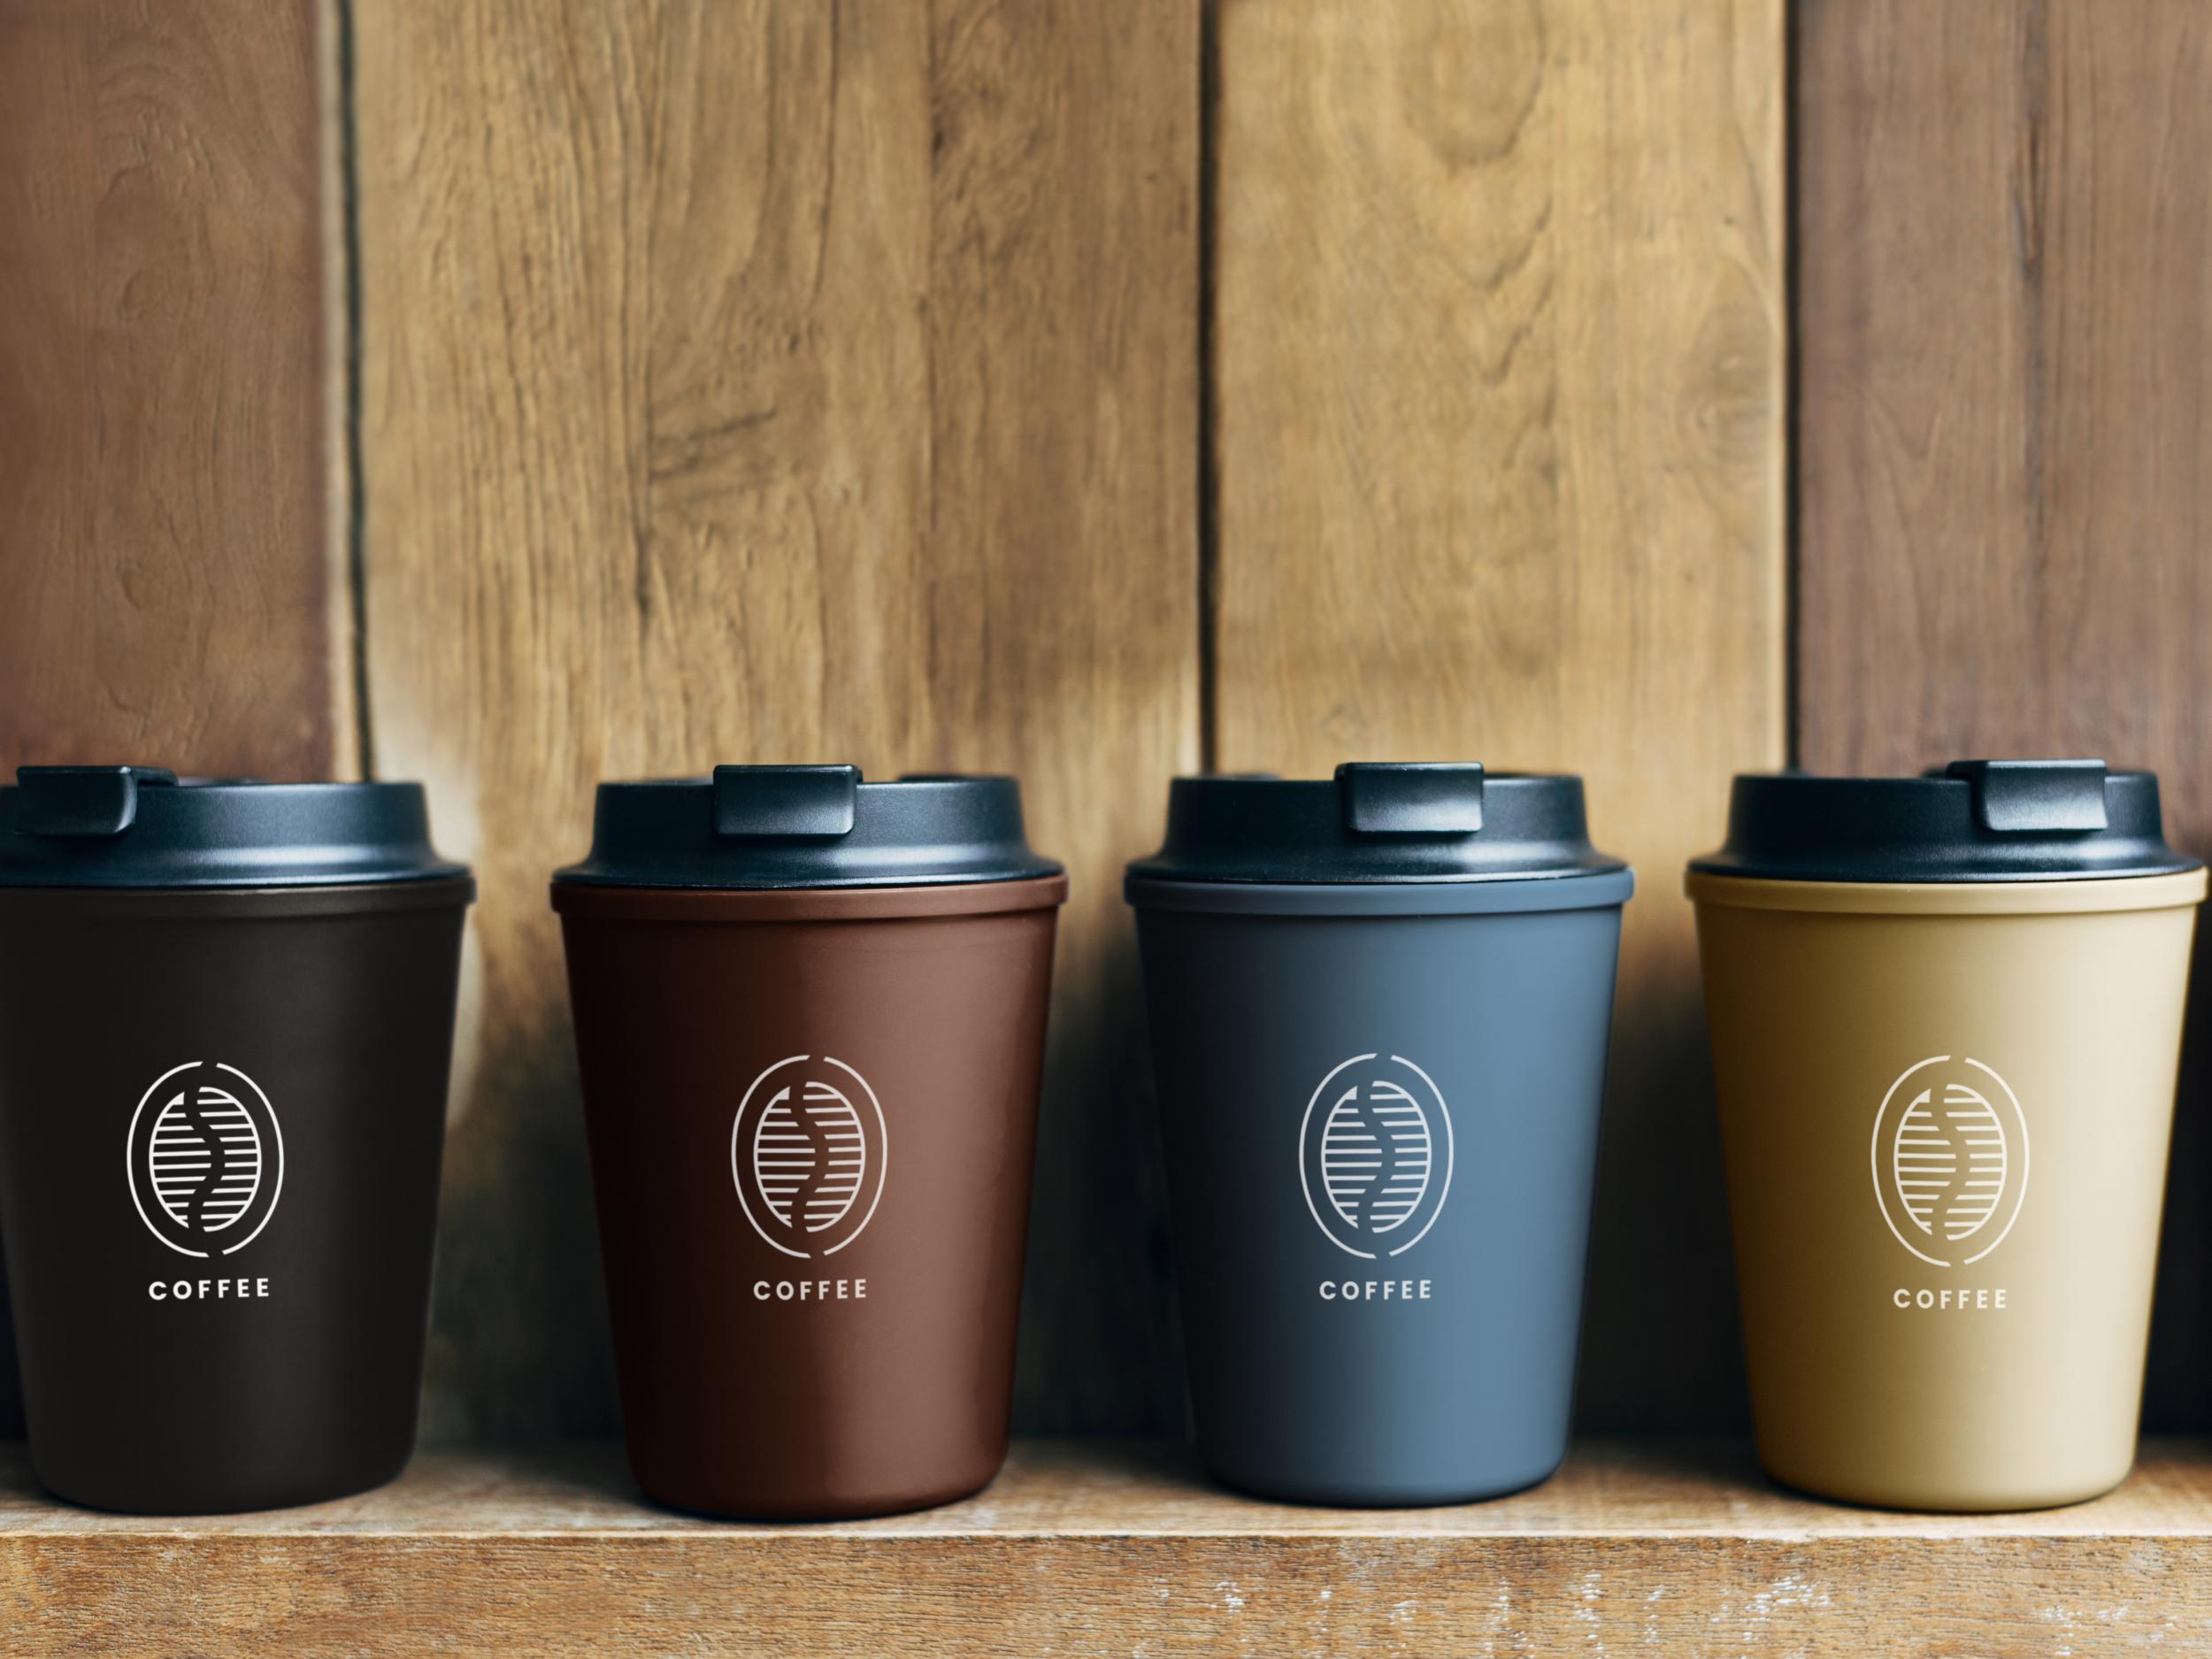 Reusable coffee cups require more energy to create and hot water to clean